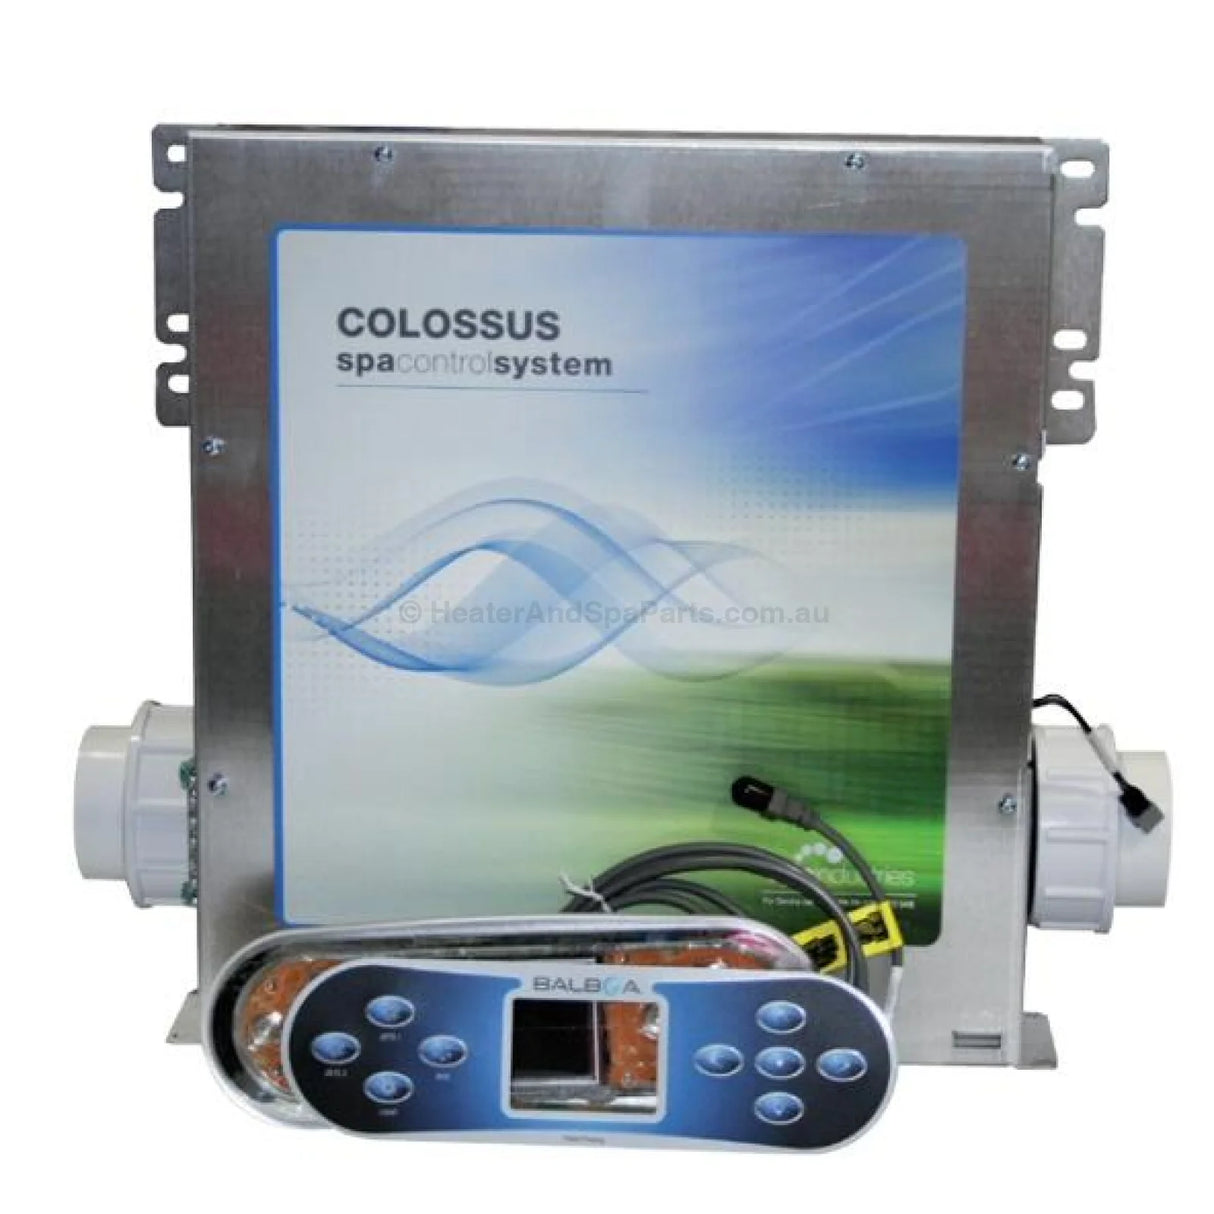 Balboa Colossus Control System & Spare Parts - Heater and Spa Parts